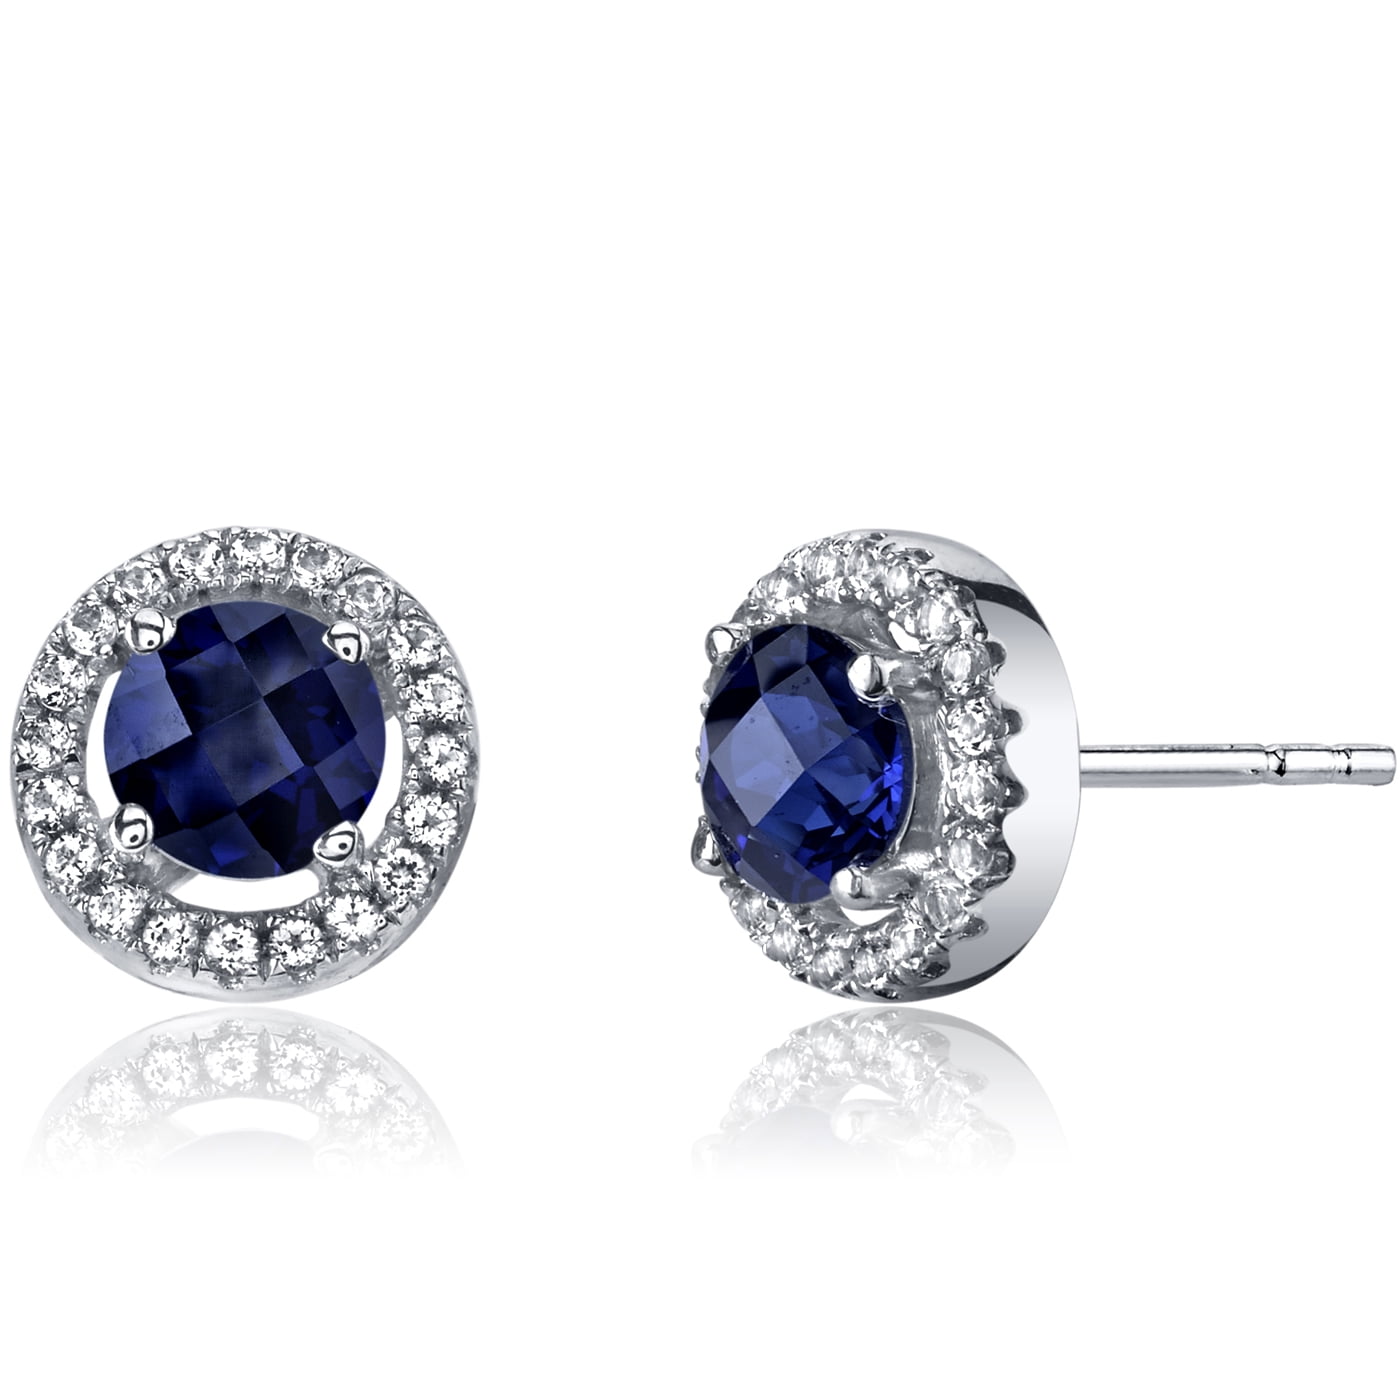 Oravo - 1.25 ct Created Blue Sapphire and White Topaz Stud Earrings in ...